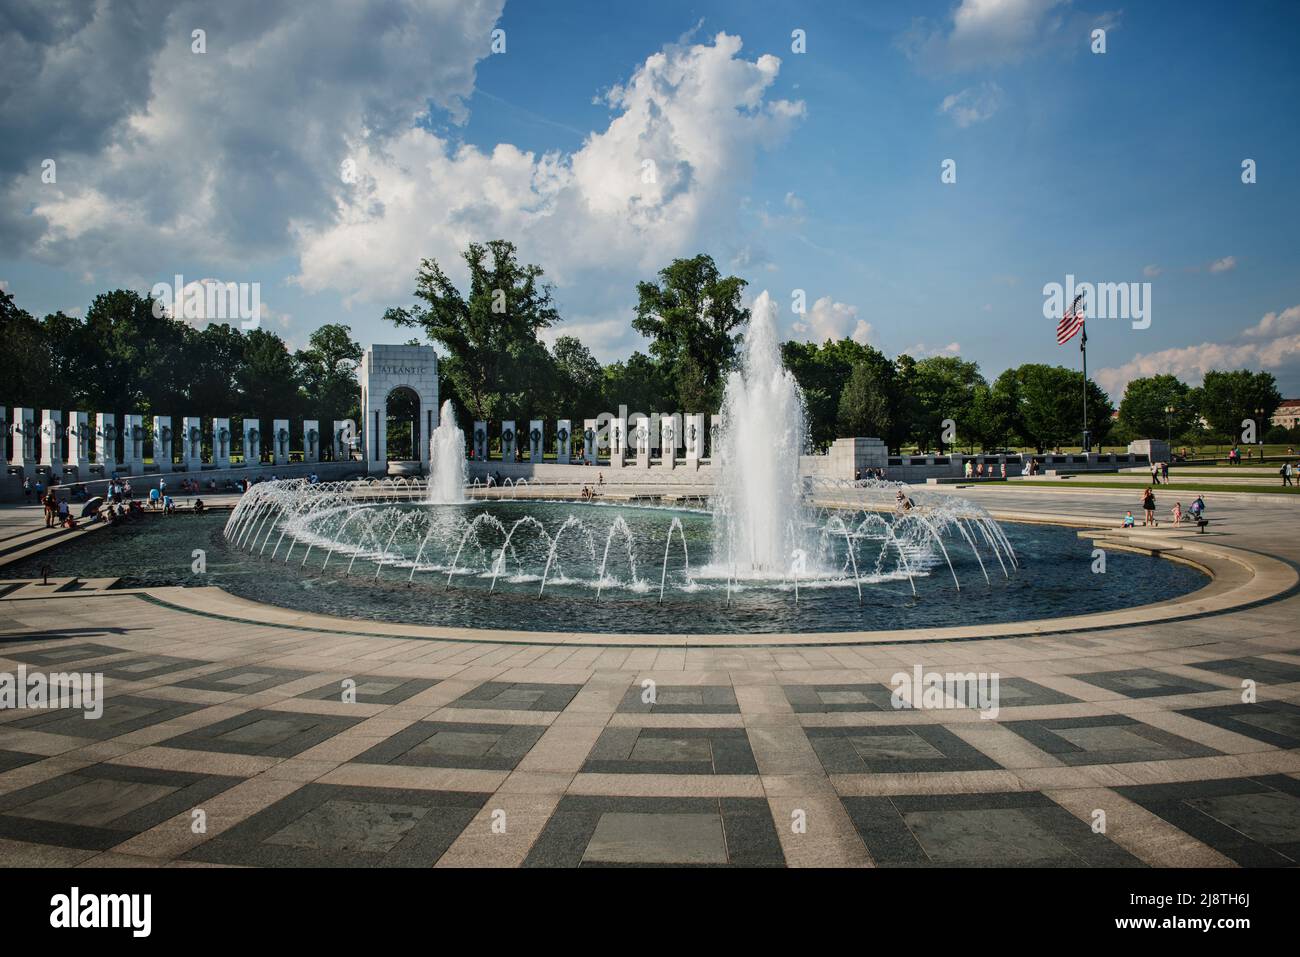 Fountain in the center or the world war two memorial, Washington DC, United States Stock Photo